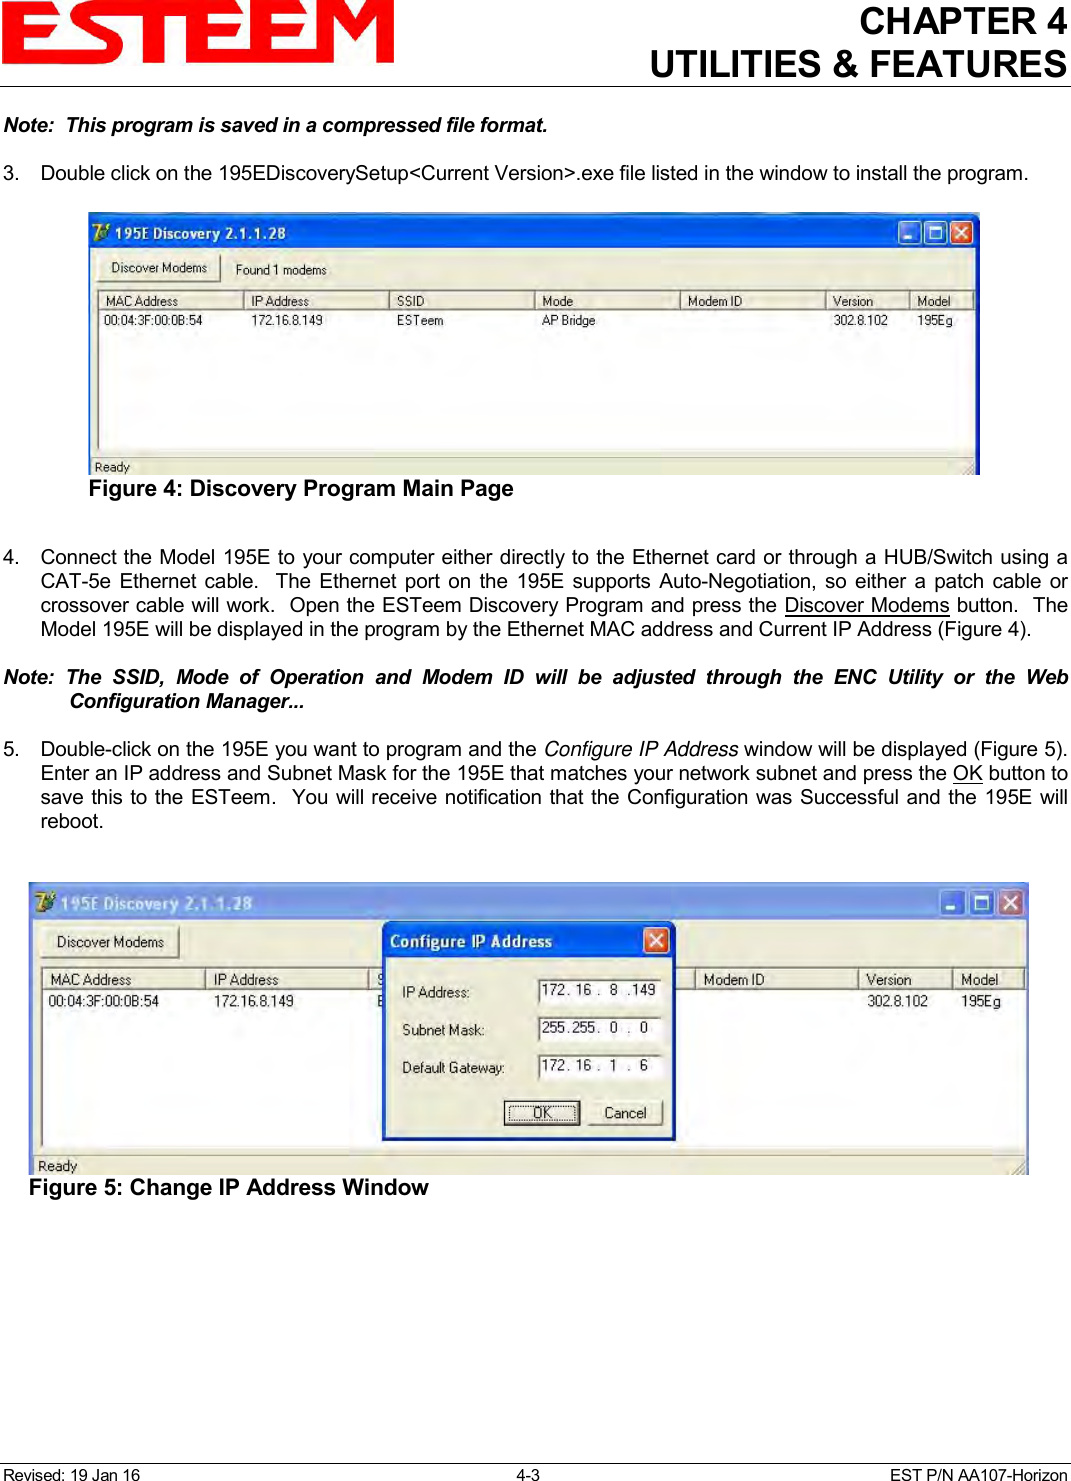 CHAPTER 4 UTILITIES &amp; FEATURES  Revised: 19 Jan 16  4-3  EST P/N AA107-Horizon Note:  This program is saved in a compressed file format.  3.  Double click on the 195EDiscoverySetup&lt;Current Version&gt;.exe file listed in the window to install the program.  4.  Connect the Model 195E to your computer either directly to the Ethernet card or through a HUB/Switch using a CAT-5e Ethernet cable.    The Ethernet port on  the  195E  supports Auto-Negotiation,  so  either  a  patch cable  or crossover cable will work.  Open the ESTeem Discovery Program and press the  Discover Modems button.  The Model 195E will be displayed in the program by the Ethernet MAC address and Current IP Address (Figure 4).    Note:  The  SSID,  Mode  of  Operation  and  Modem  ID  will  be  adjusted  through  the  ENC  Utility  or  the  Web Configuration Manager...     5.  Double-click on the 195E you want to program and the Configure IP Address window will be displayed (Figure 5). Enter an IP address and Subnet Mask for the 195E that matches your network subnet and press the OK button to save this to the ESTeem.  You will receive notification that the Configuration was Successful and the 195E will reboot.   Figure 4: Discovery Program Main Page  Figure 5: Change IP Address Window  